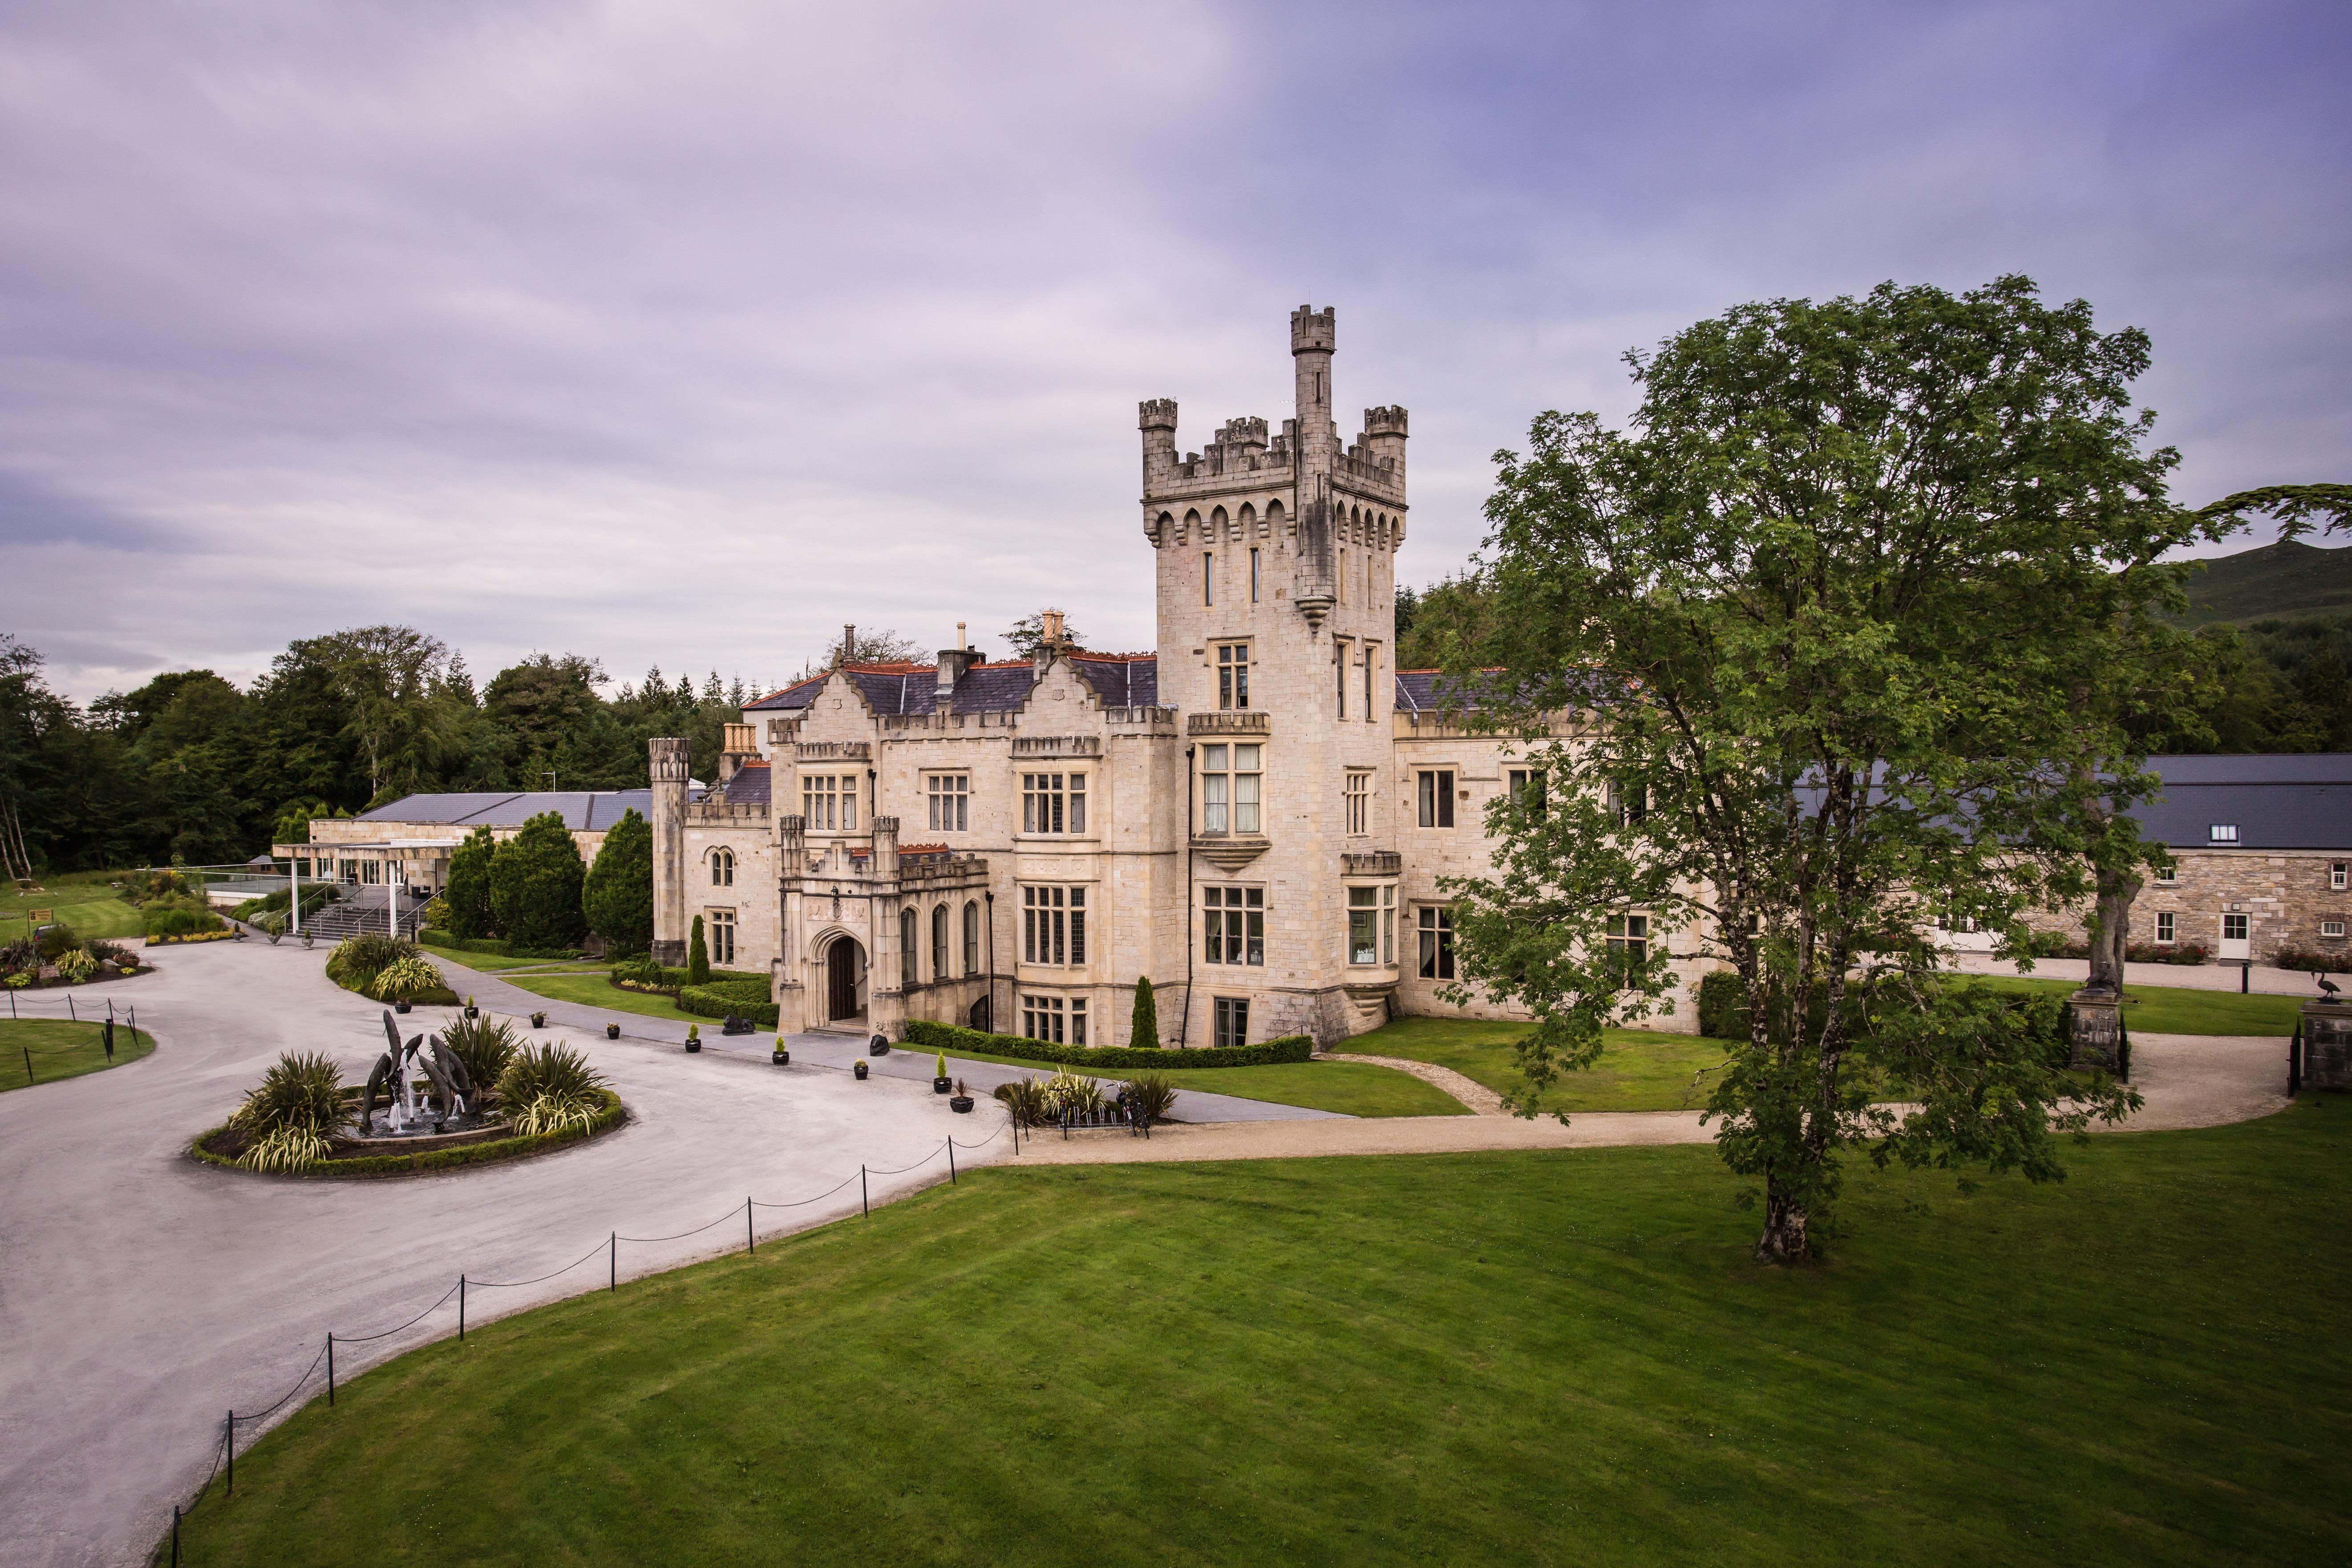 Lough Eske: Set within 43 acres of forest at the foot of the mountains in Donegal, this castle has been a place for entertaining guests since 1861.